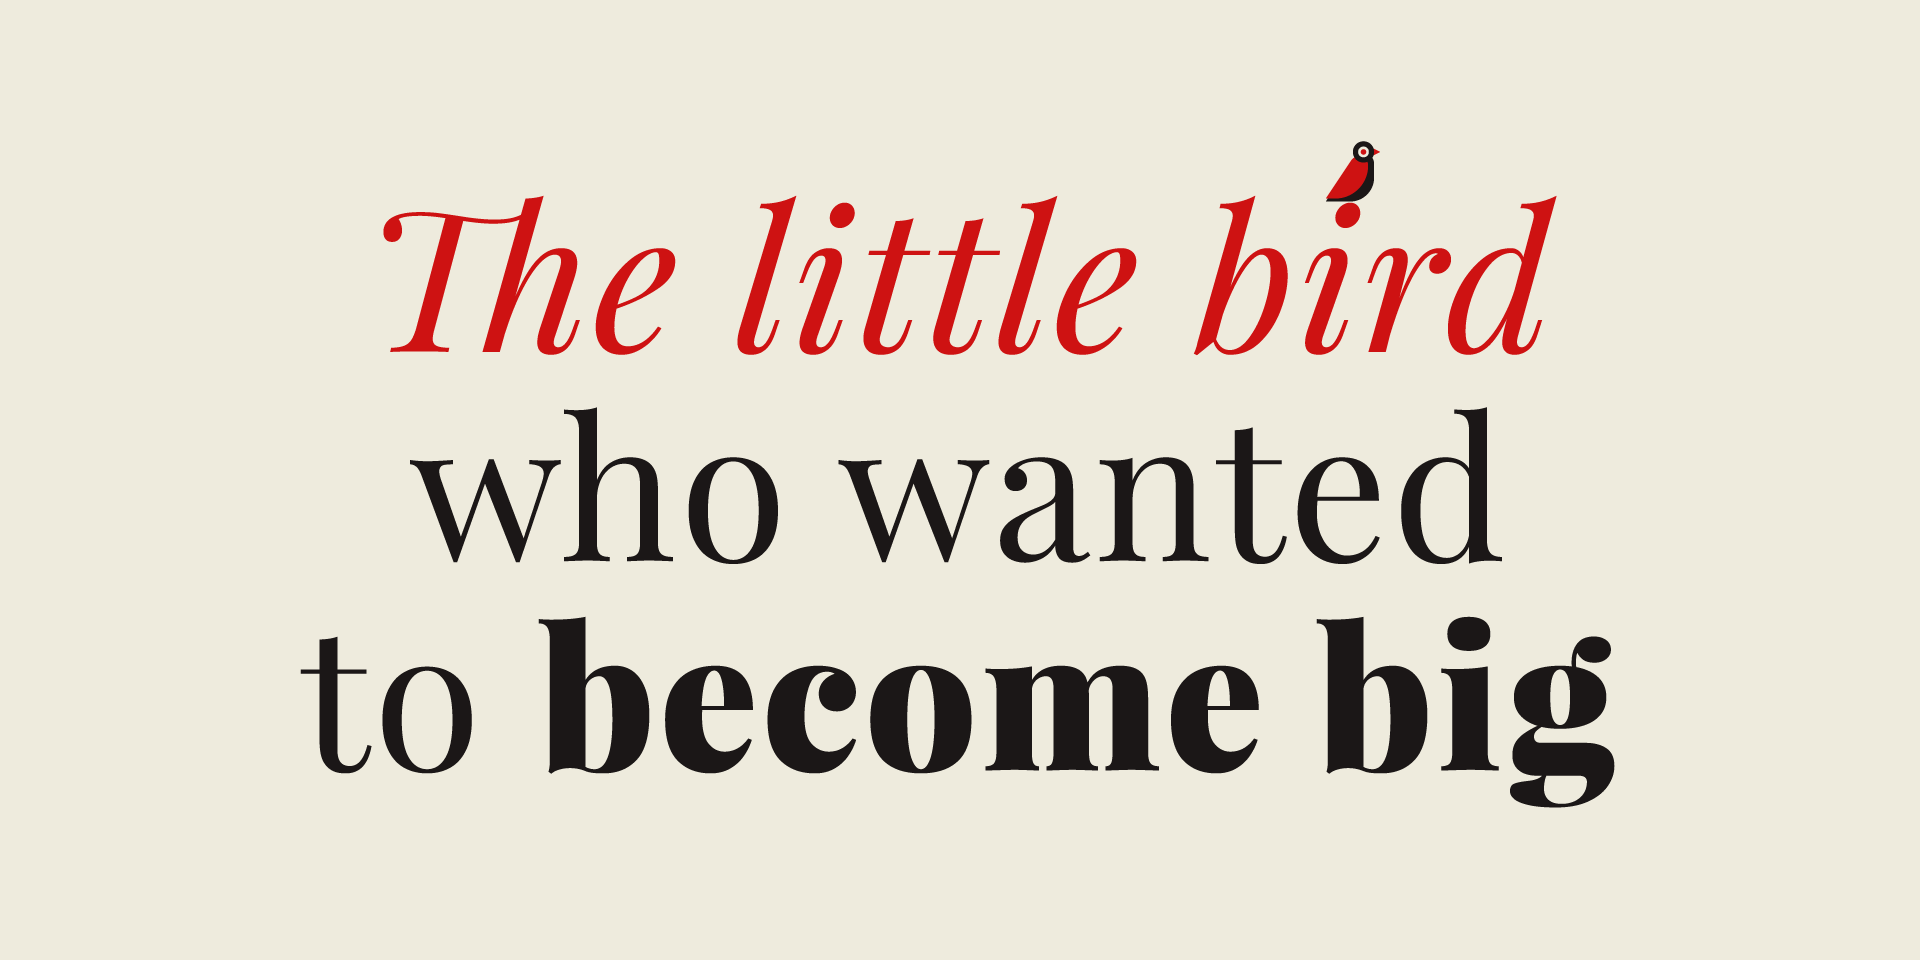 The little bird who wanted to become big